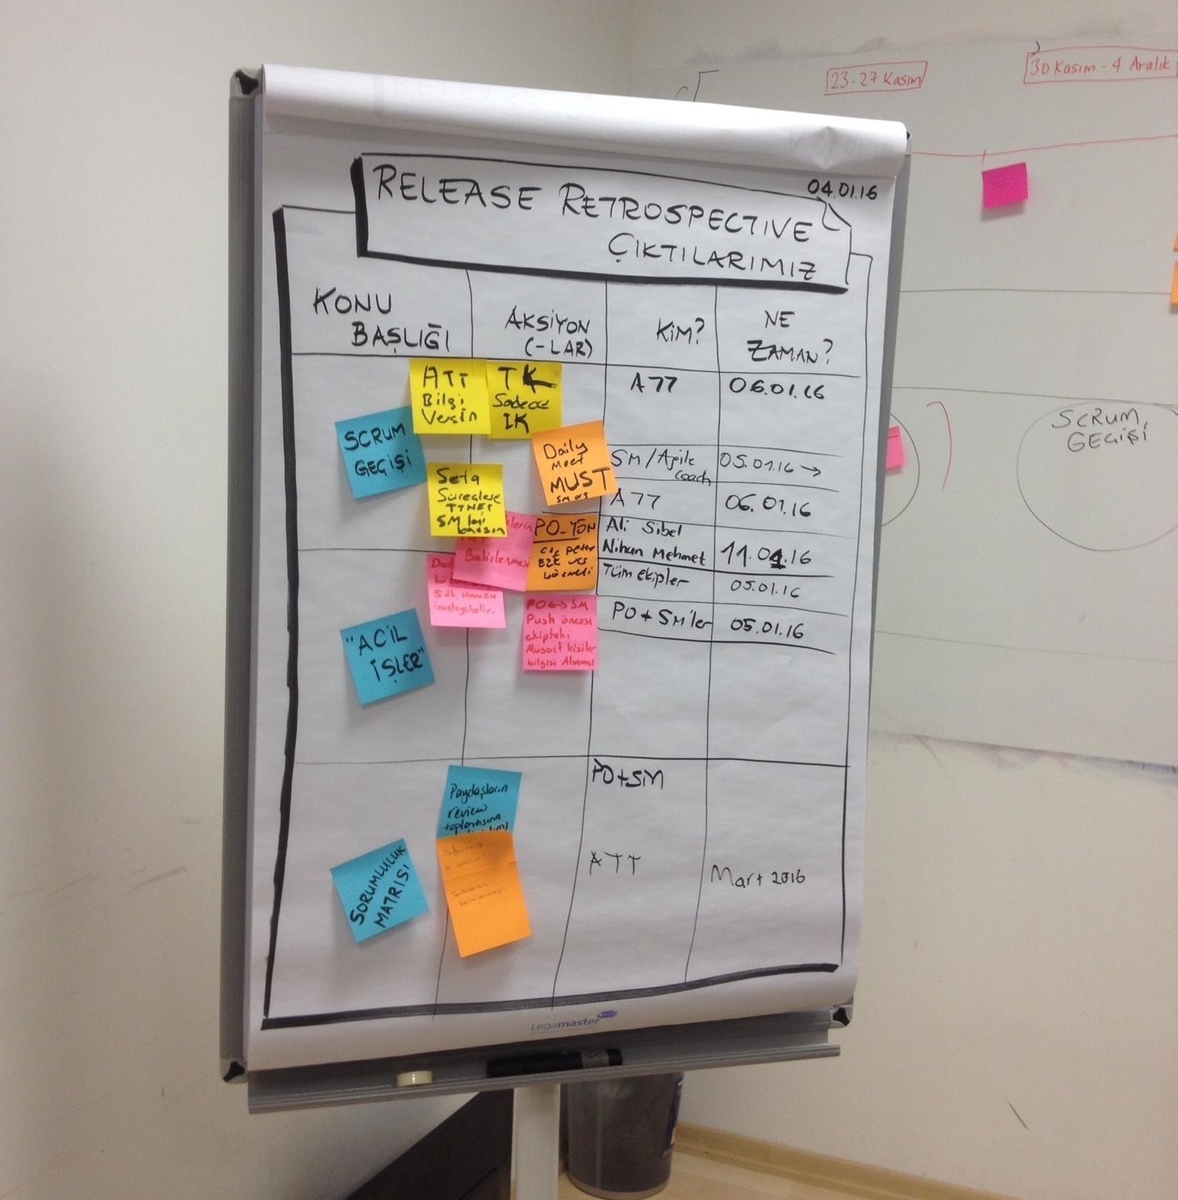 A picture taken when agile42 coaches facilitating Release Retrospective with Transition Team and Development Teams